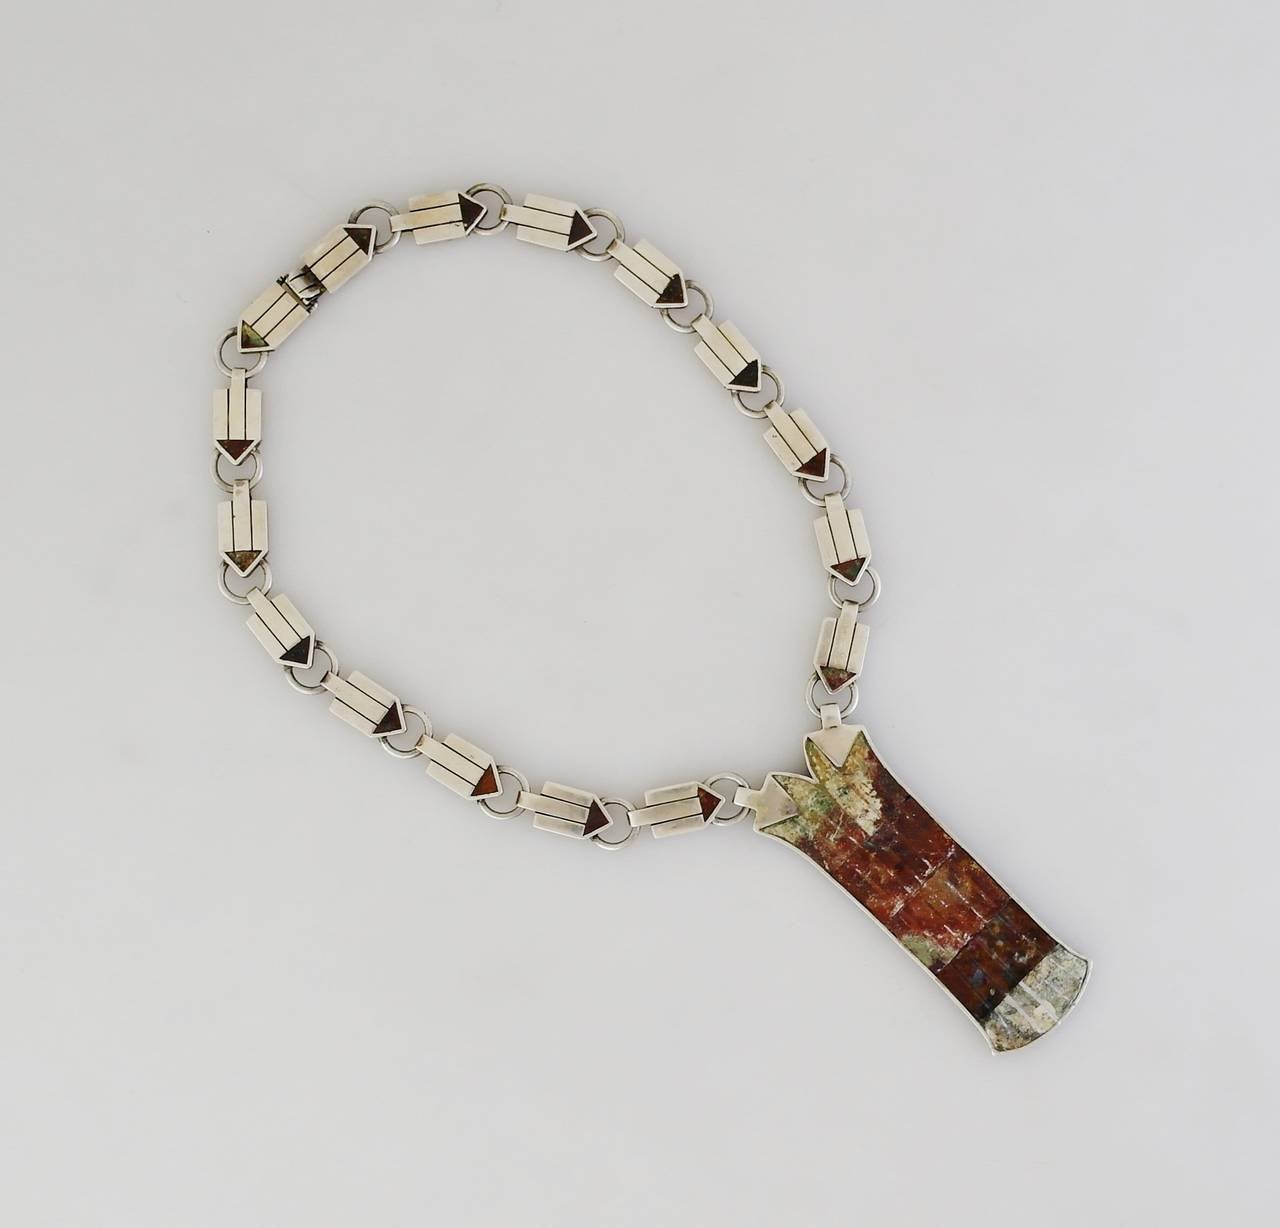 Being offered is a circa 1950 sterling silver necklace by William Spratling of Taxco, Mexico; rectangular links decorated with triangular hard stone insets, each connected with 'O' rings, supporting a large pendant with multi-stone inlay on both